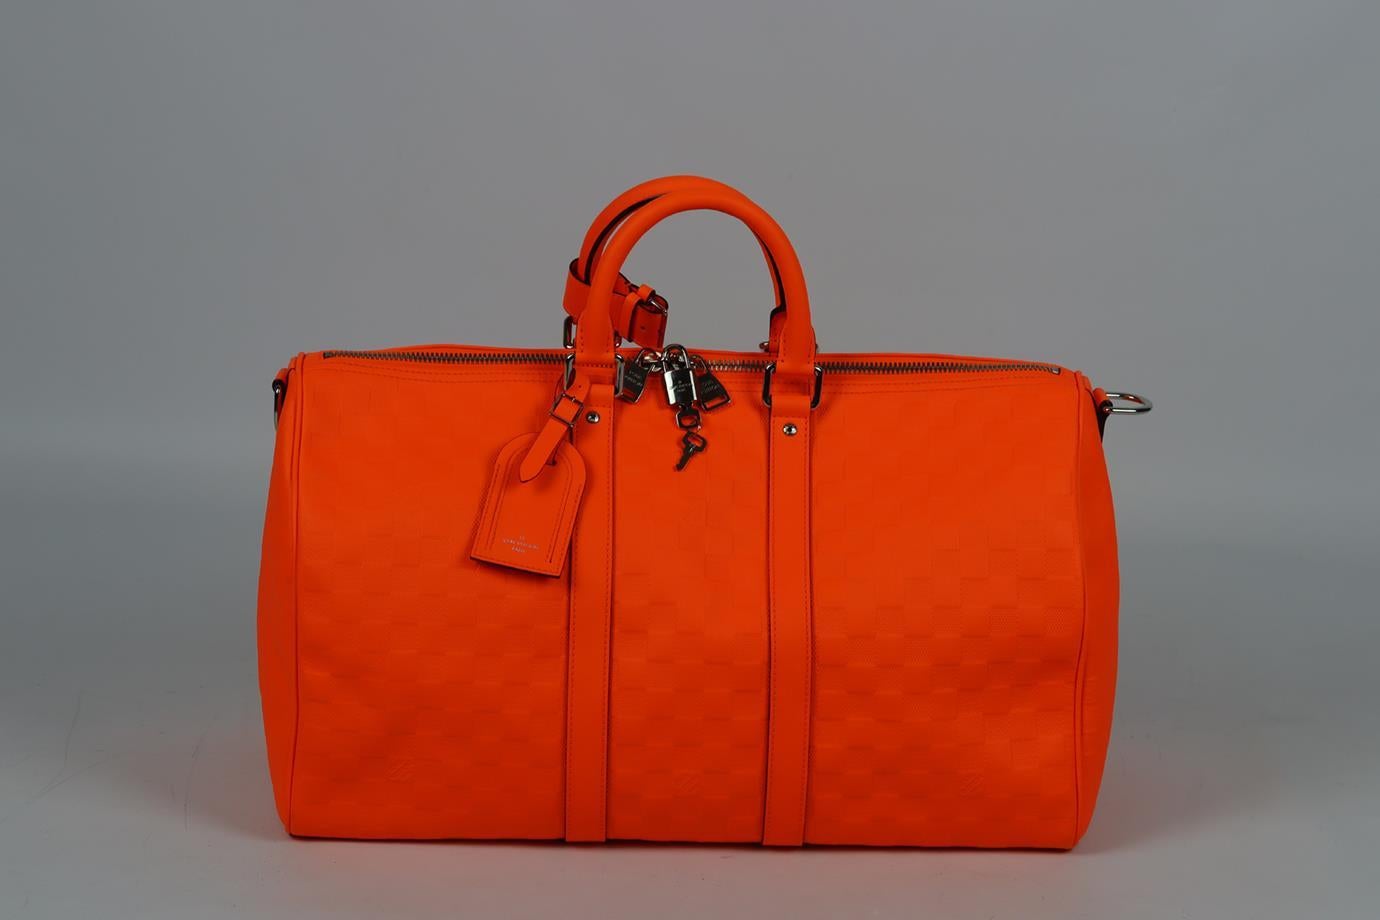 Louis Vuitton Keepall Boudoulière 45 Damier Infini leather travel bag. Made from neon-orange Damier Infini embossed leather with matching leather handles and strap, it has a large internal compartments with slit and zip pockets. Orange. Zip